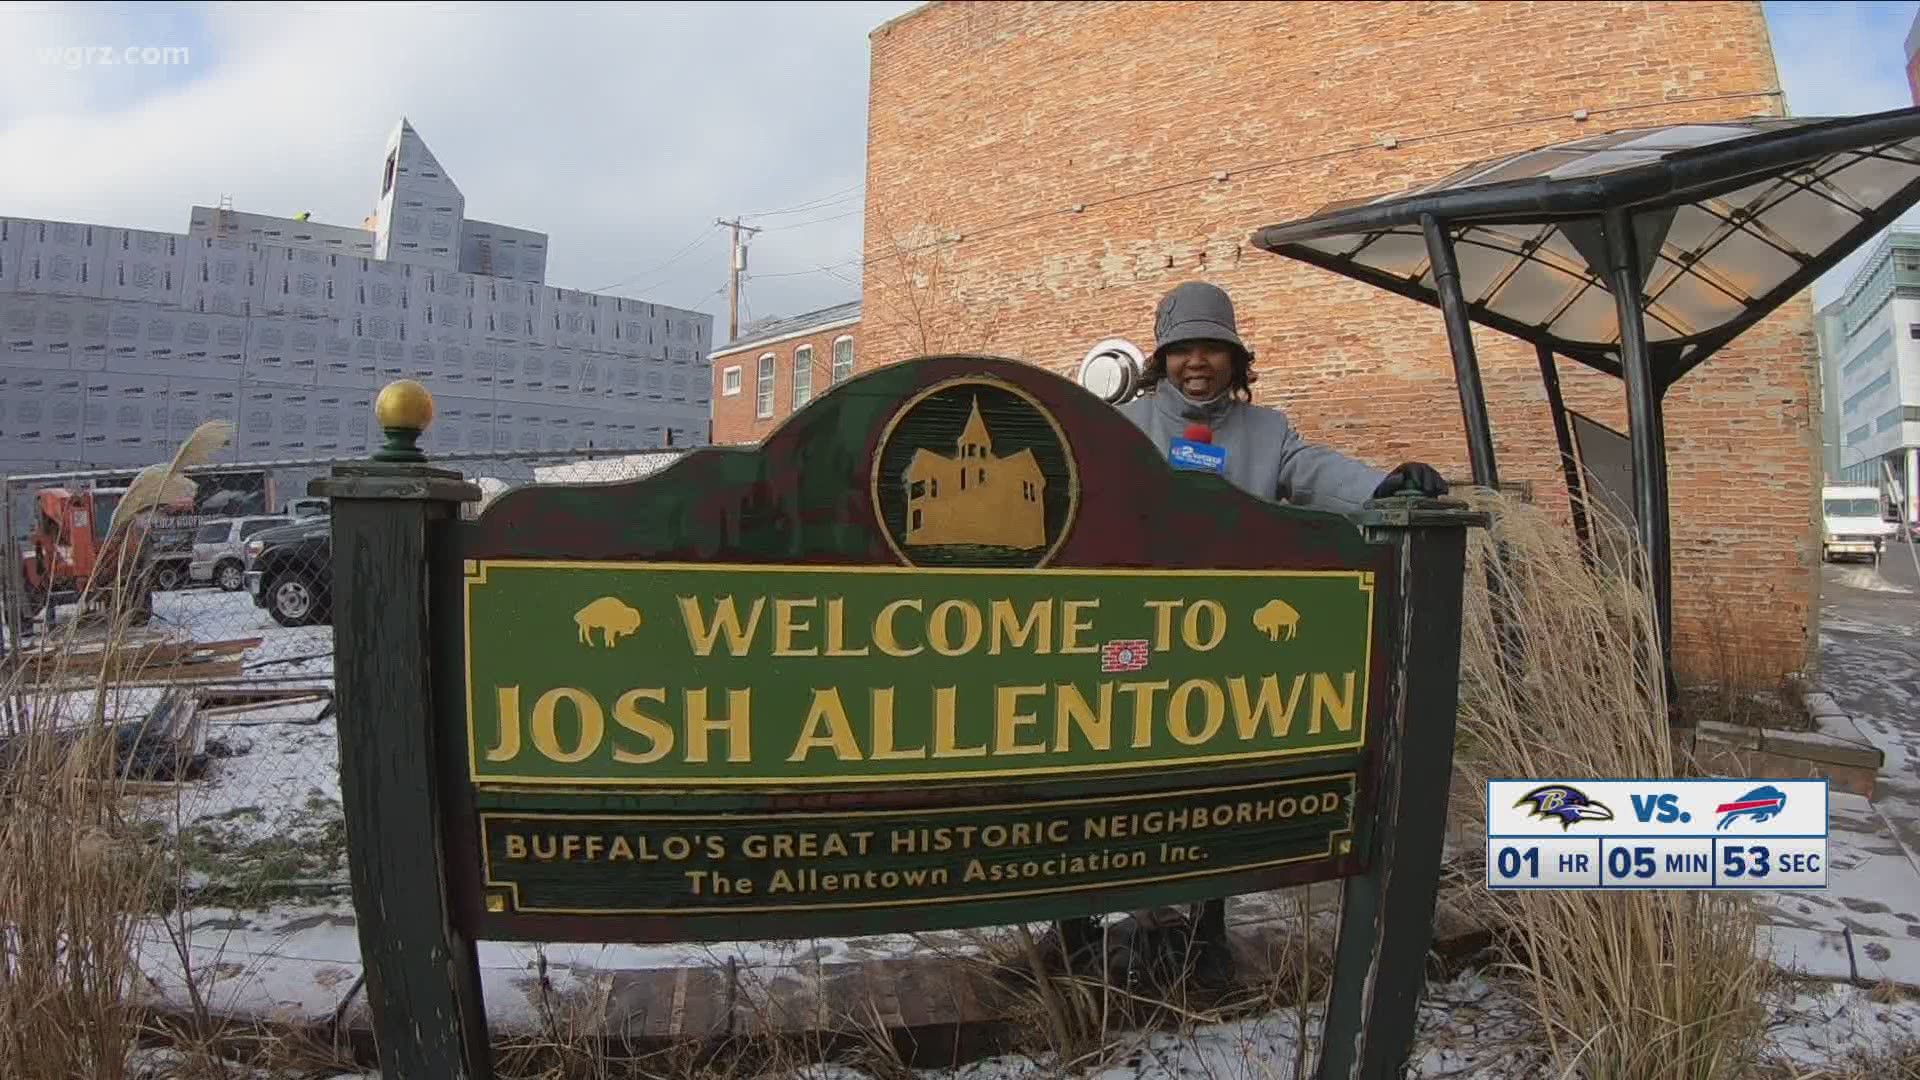 Since we're talking about numbers how about 17, for Josh Allen, and we're in Josh Allentown!